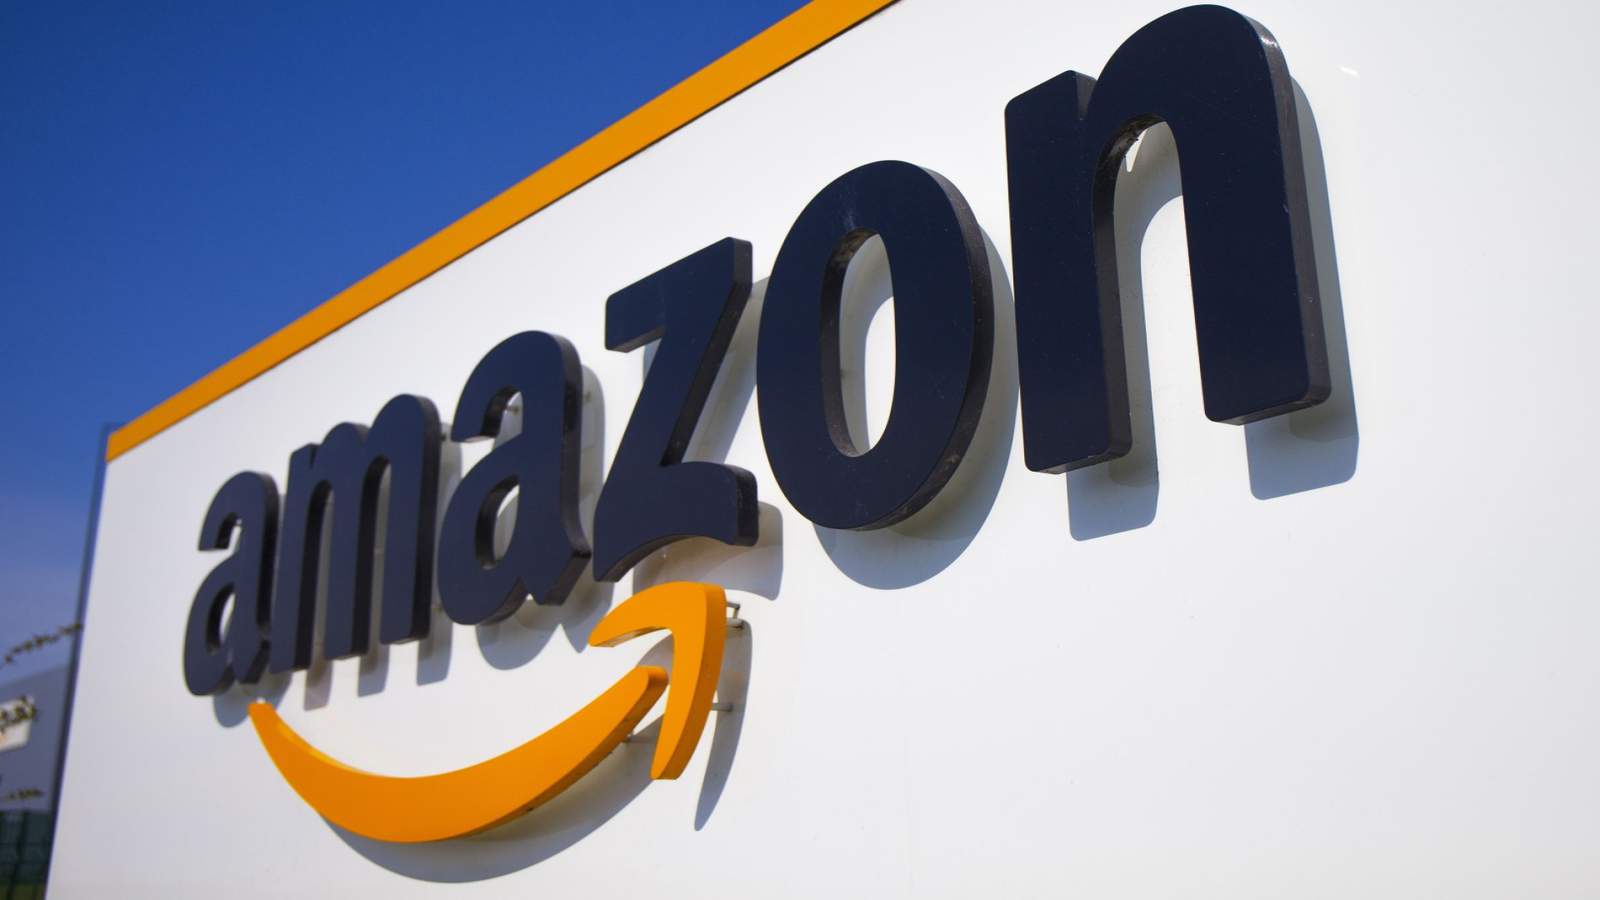 Amazon to give Space Coast shoppers same-day delivery and ‘dramatic’ impact on local businesses